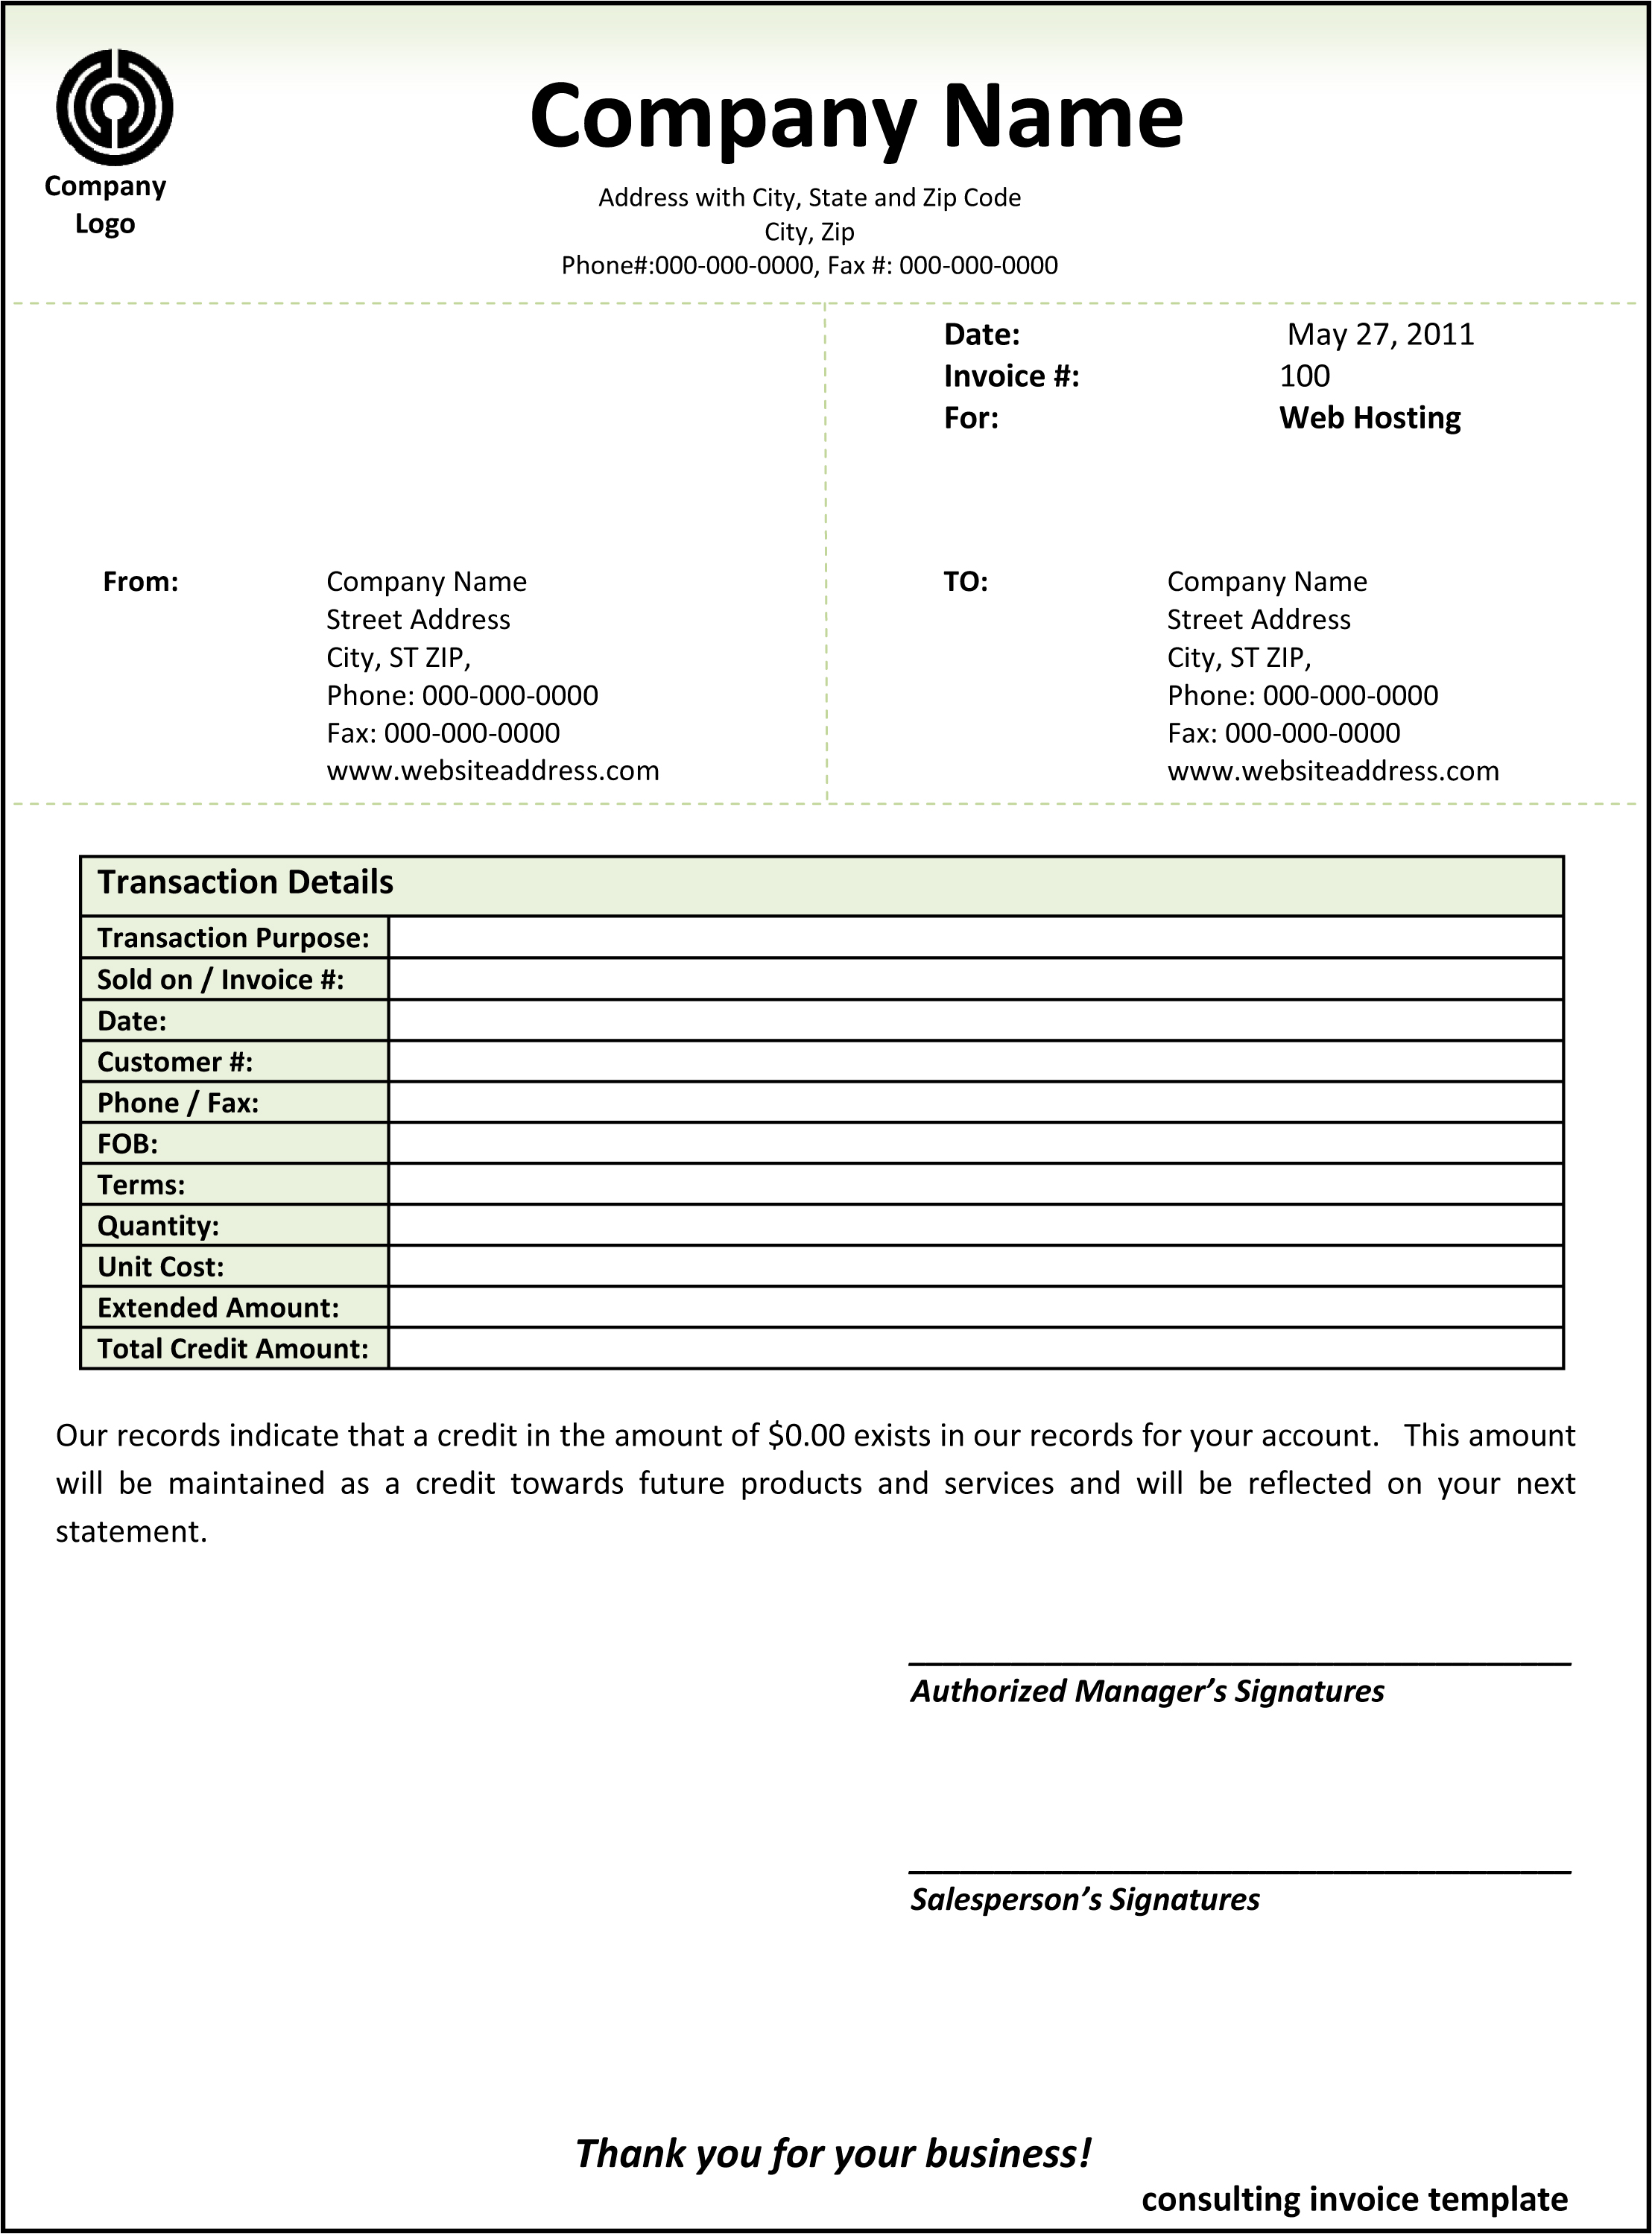 Consulting invoice template in word porbd